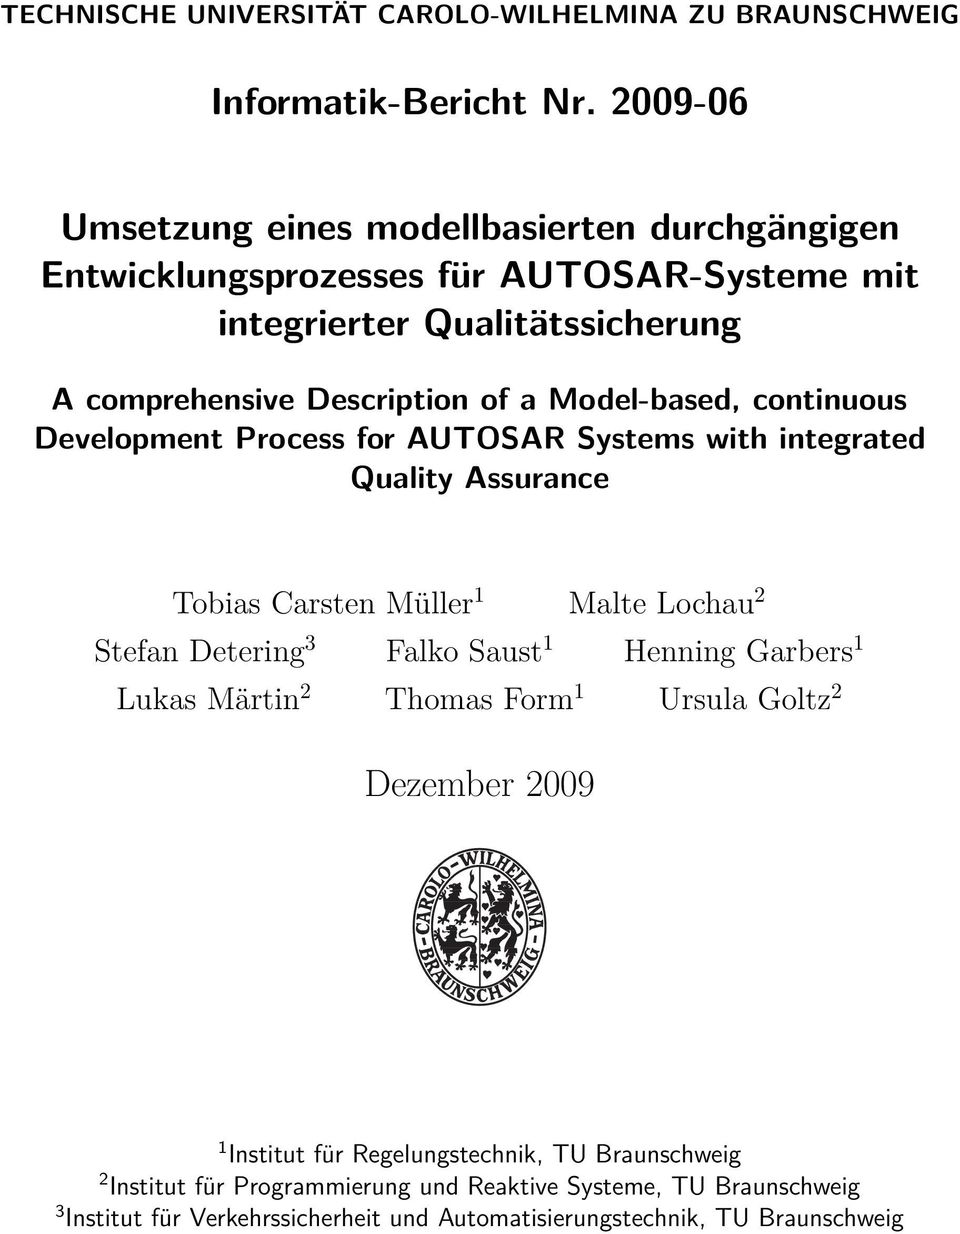 Model-based, continuous Development Process for AUTOSAR Systems with integrated Quality Assurance Tobias Carsten Müller 1 Malte Lochau 2 Stefan Detering 3 Falko Saust 1